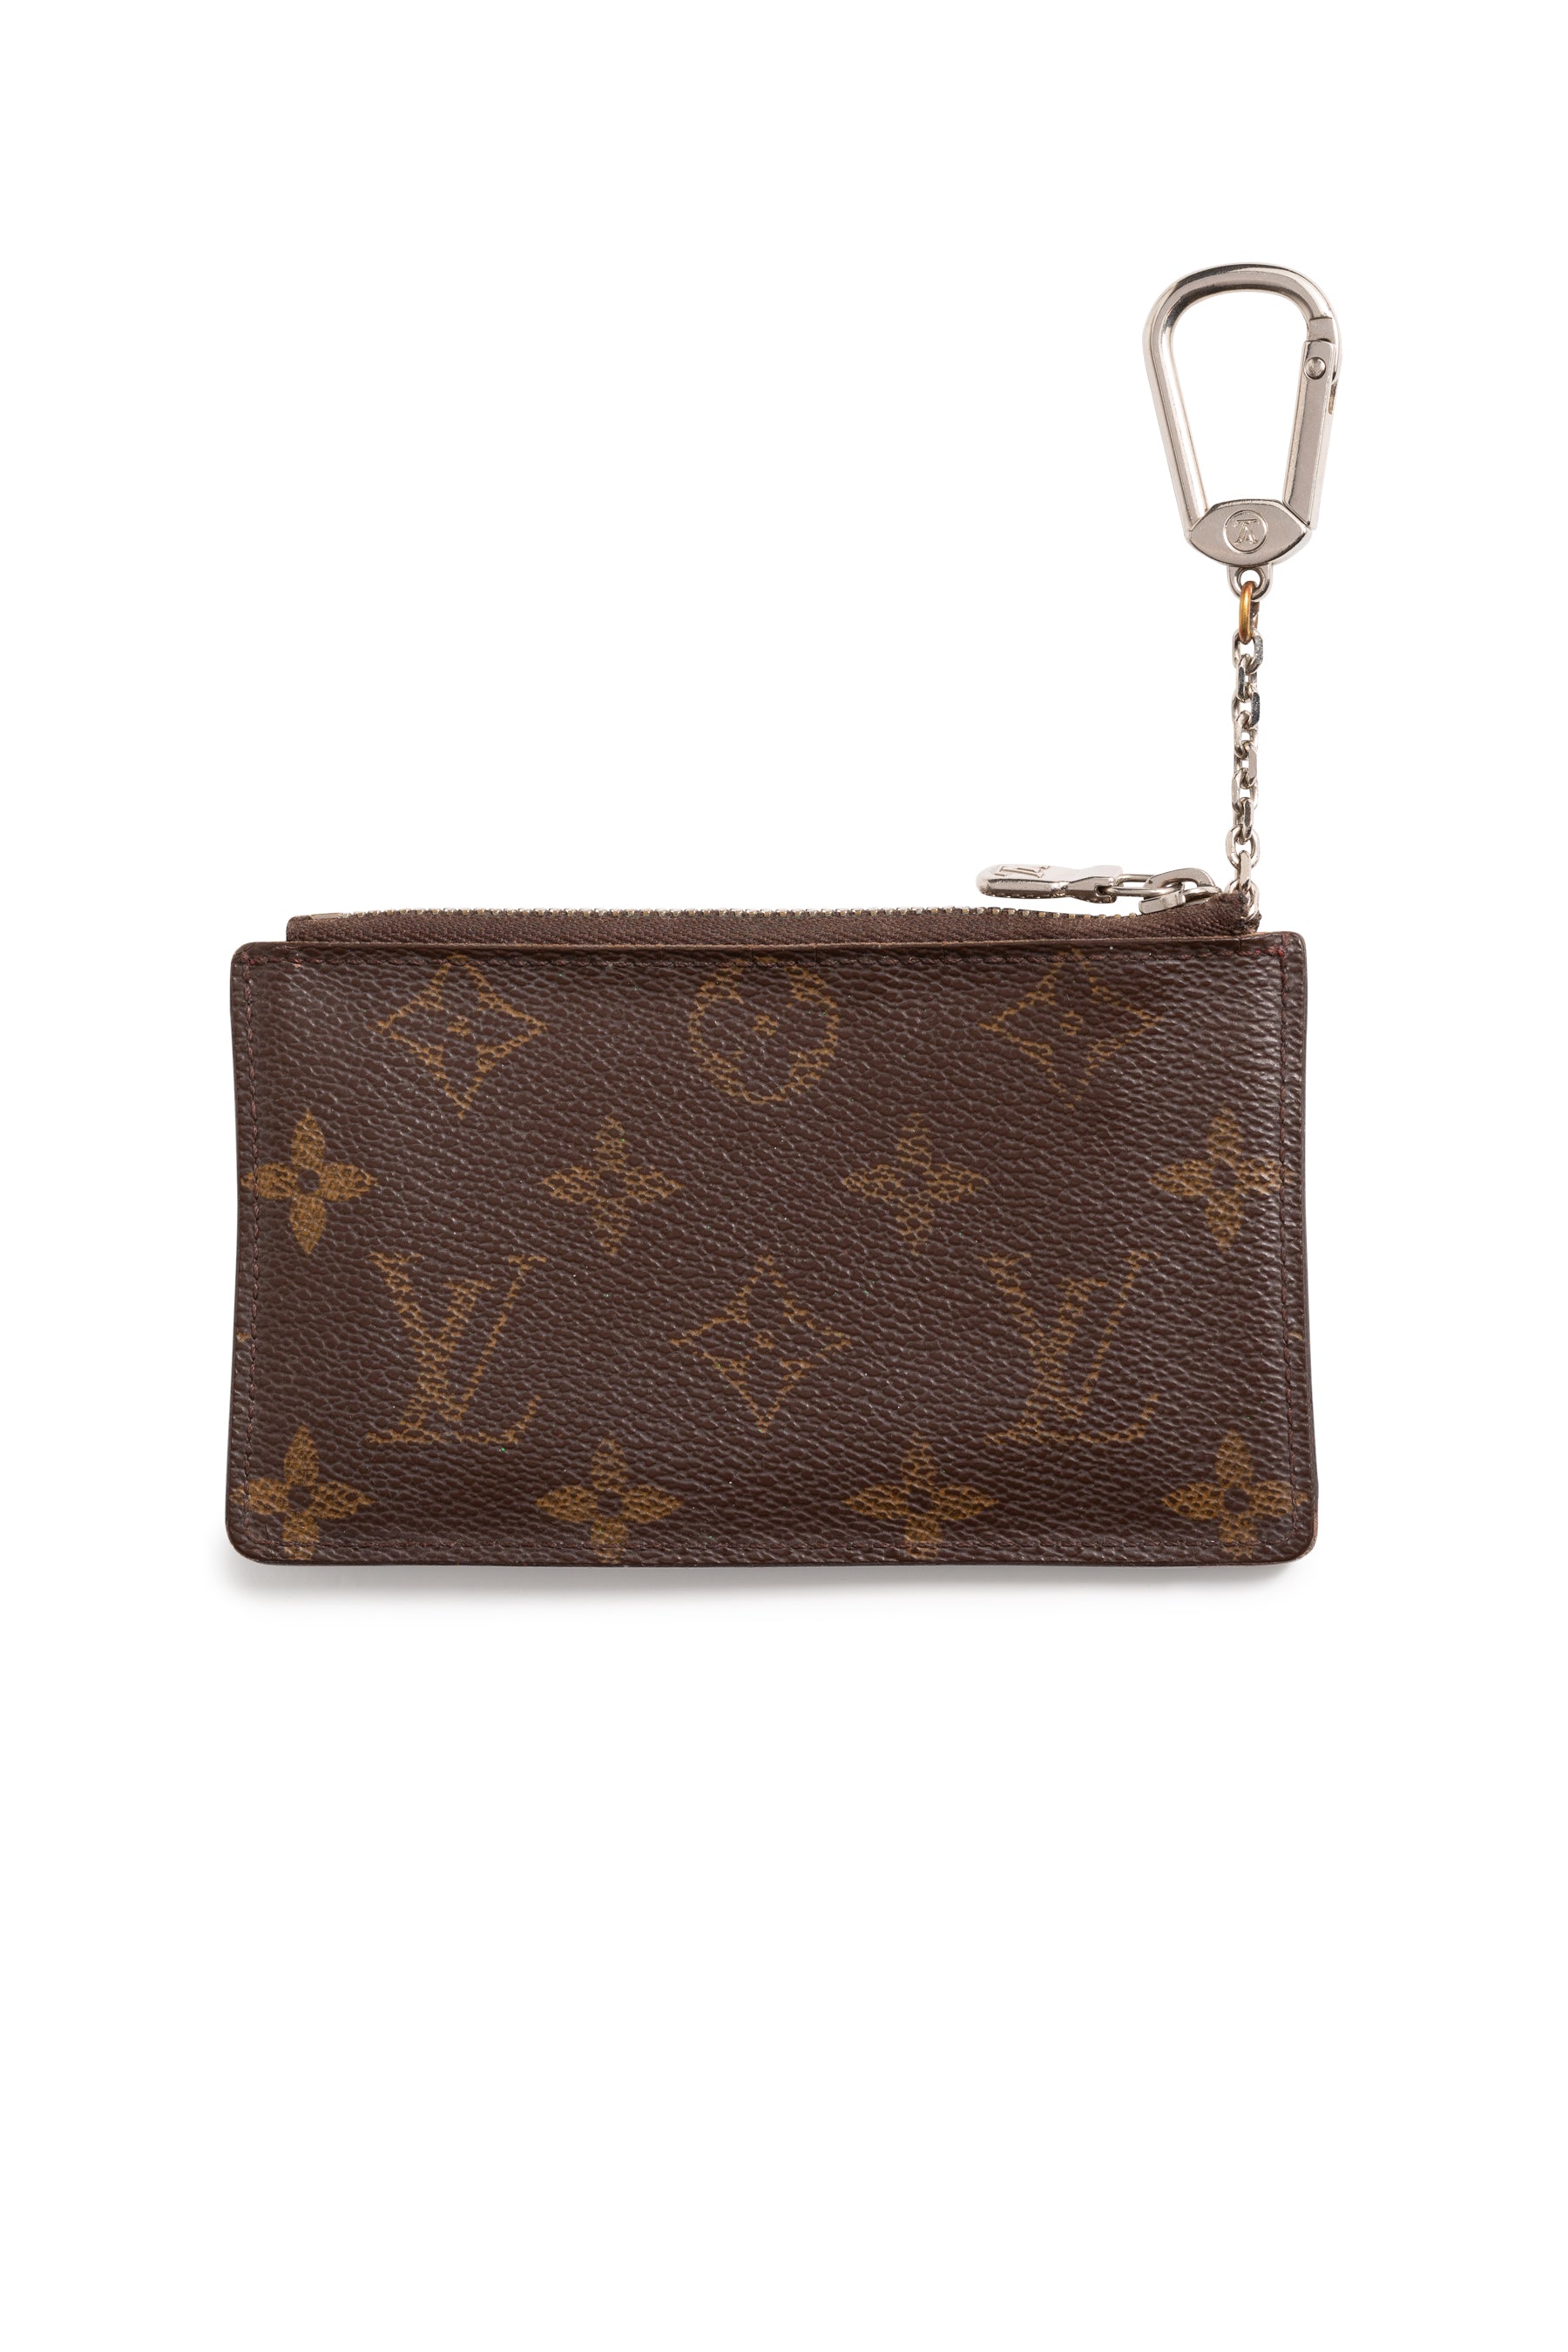 SOLD! previously owned louis vuitton keychain card holder in